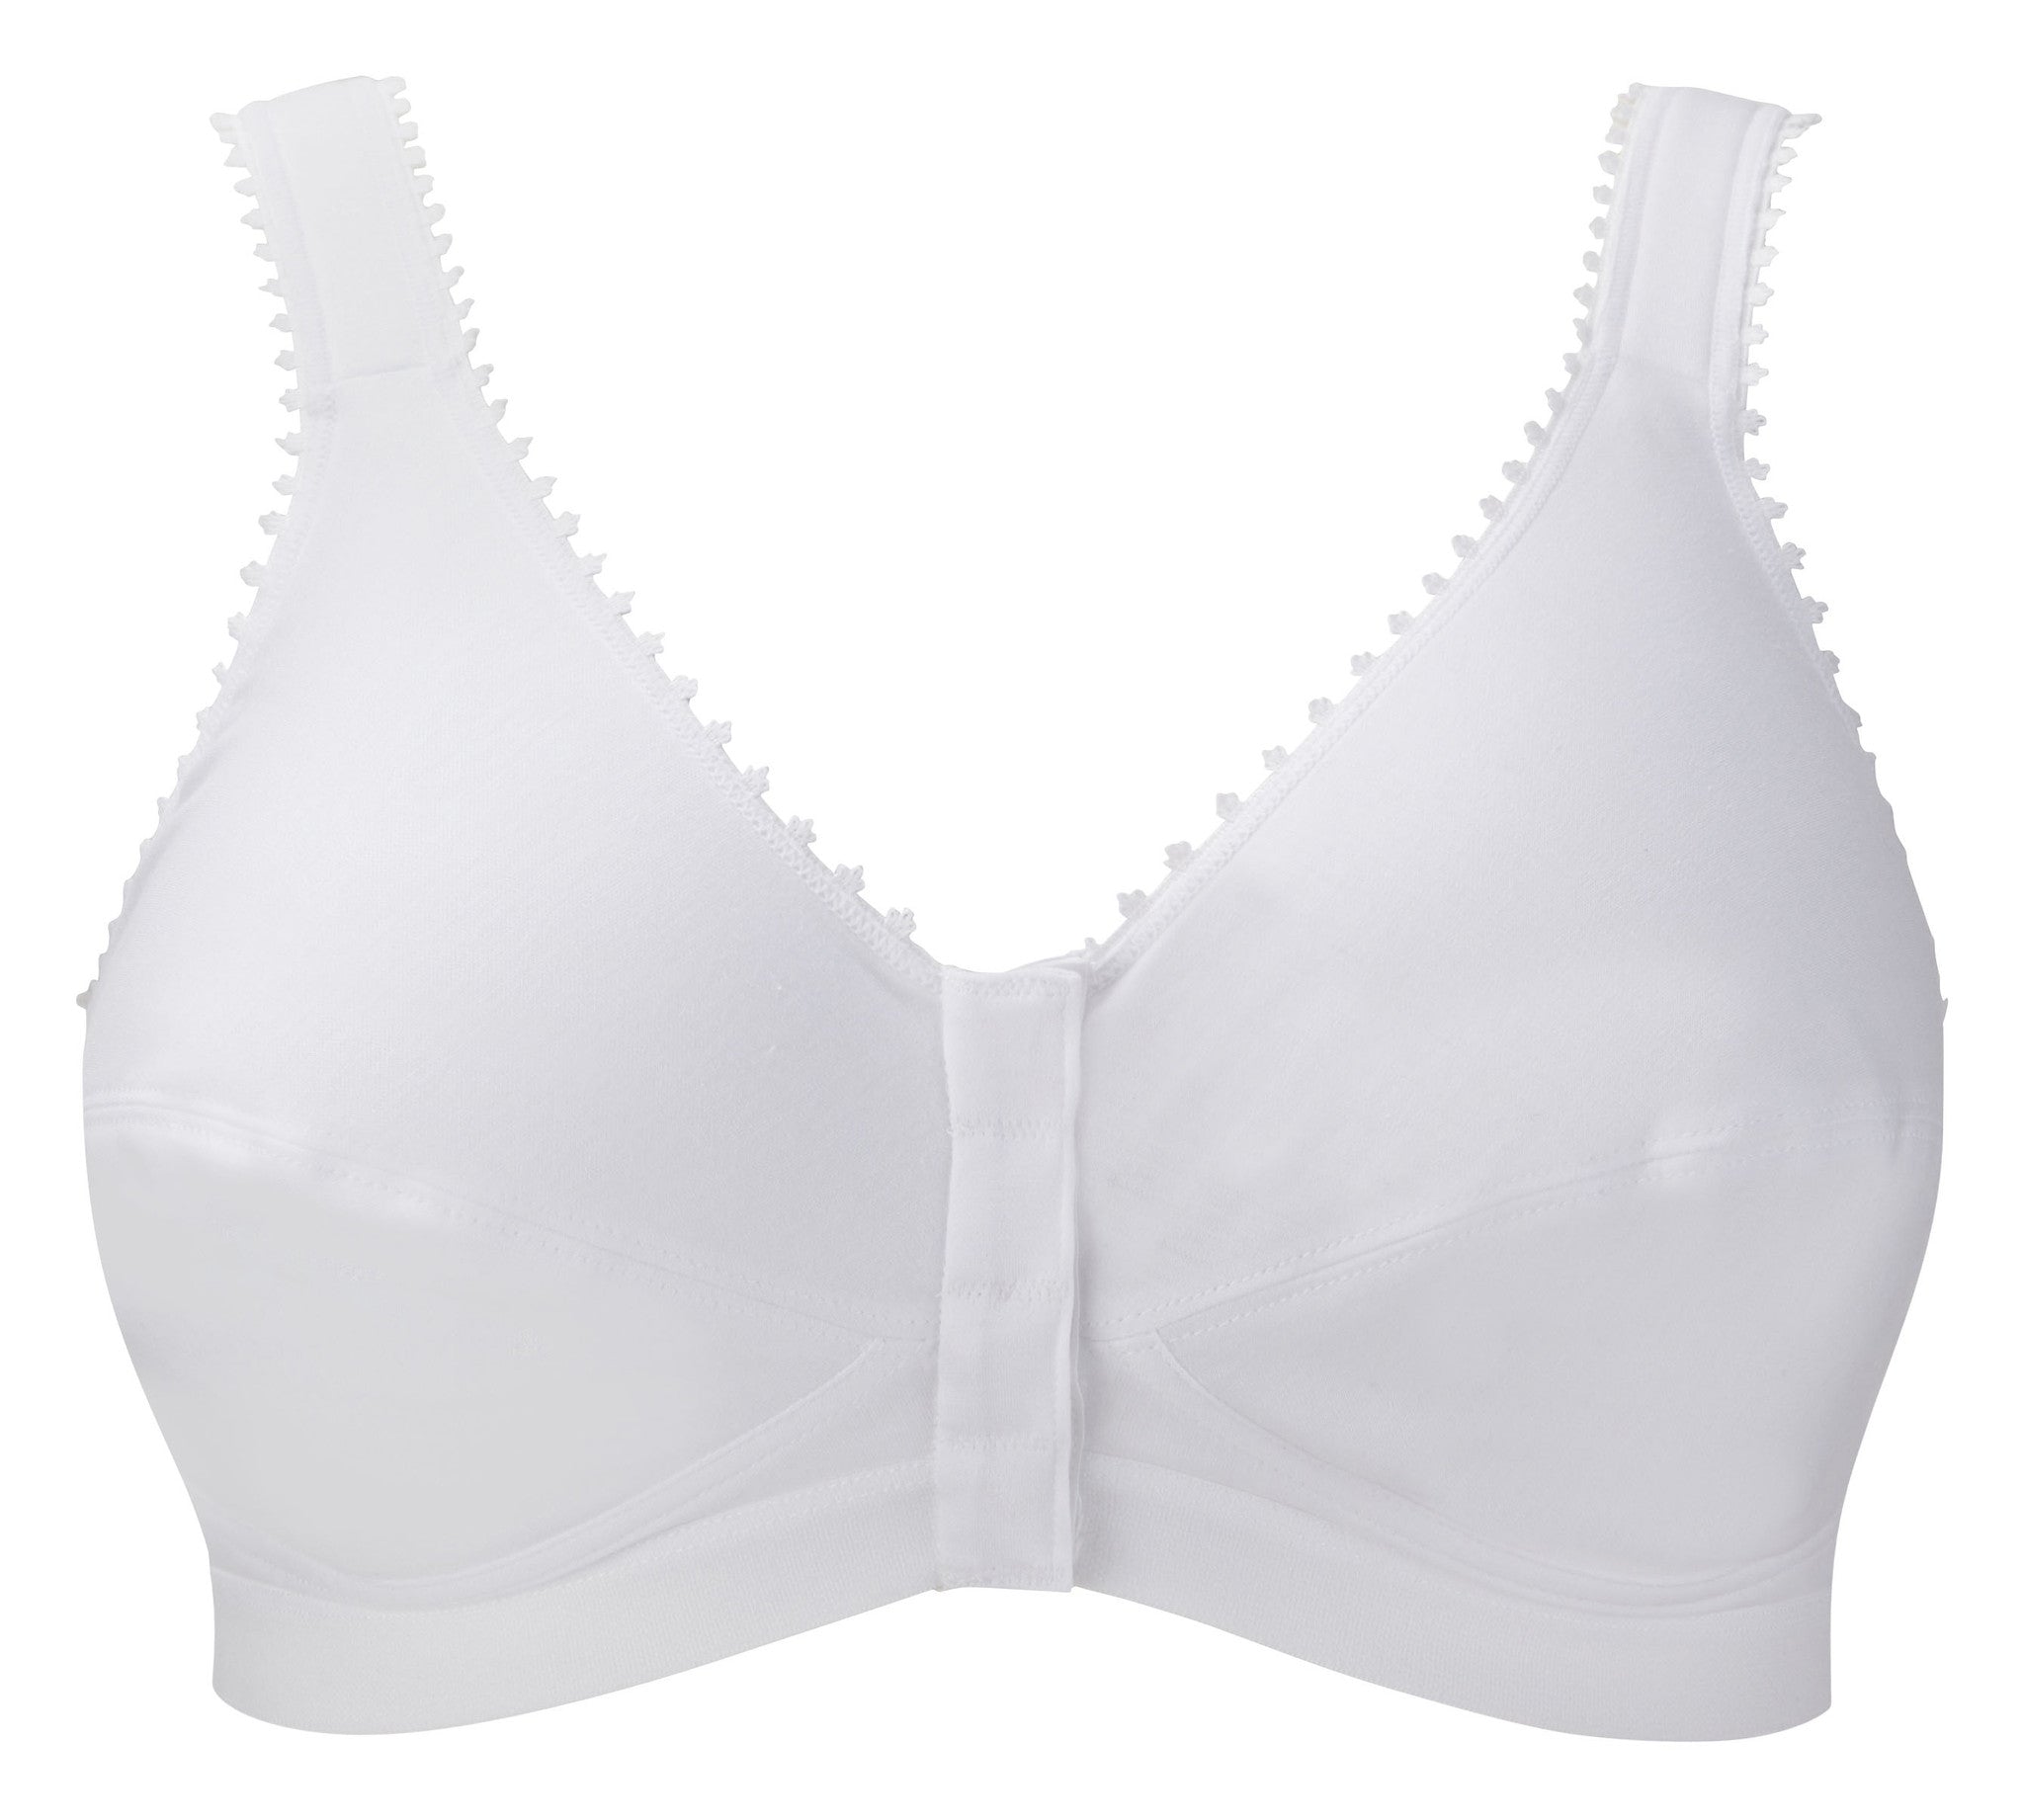 Elba Essential Bra with Magnetic Front Fastener by Elba London